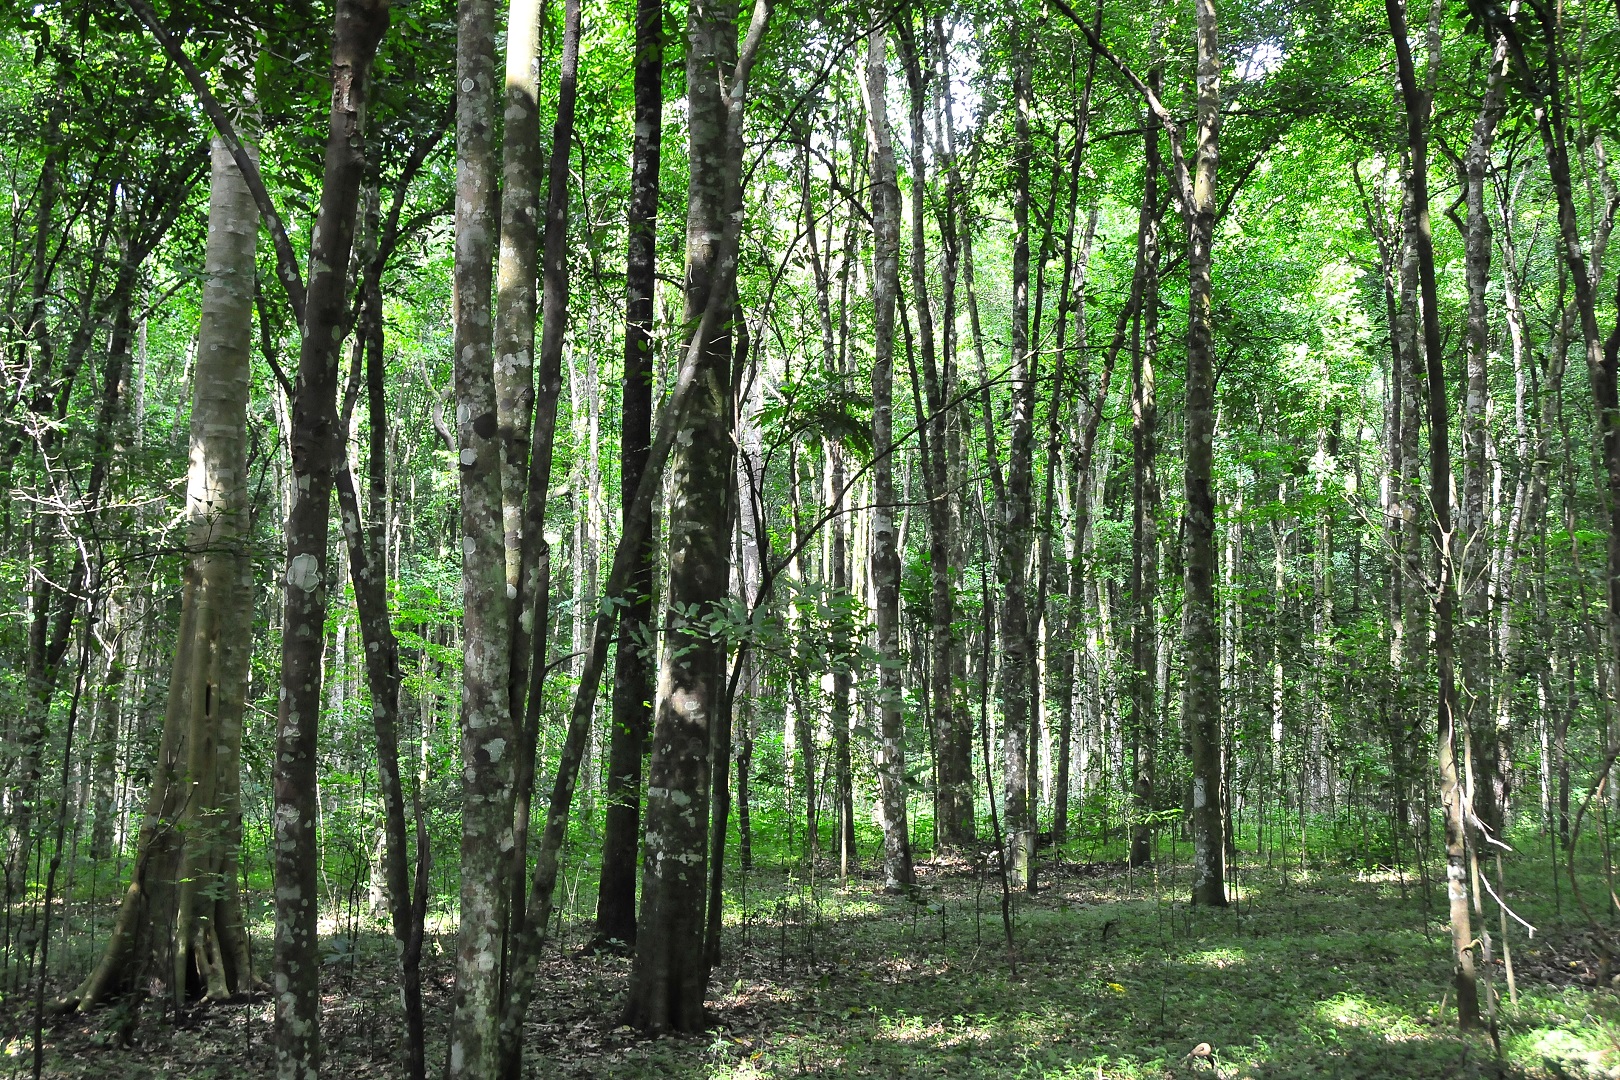 Maramagambo forest in Queen Elizabeth National Park